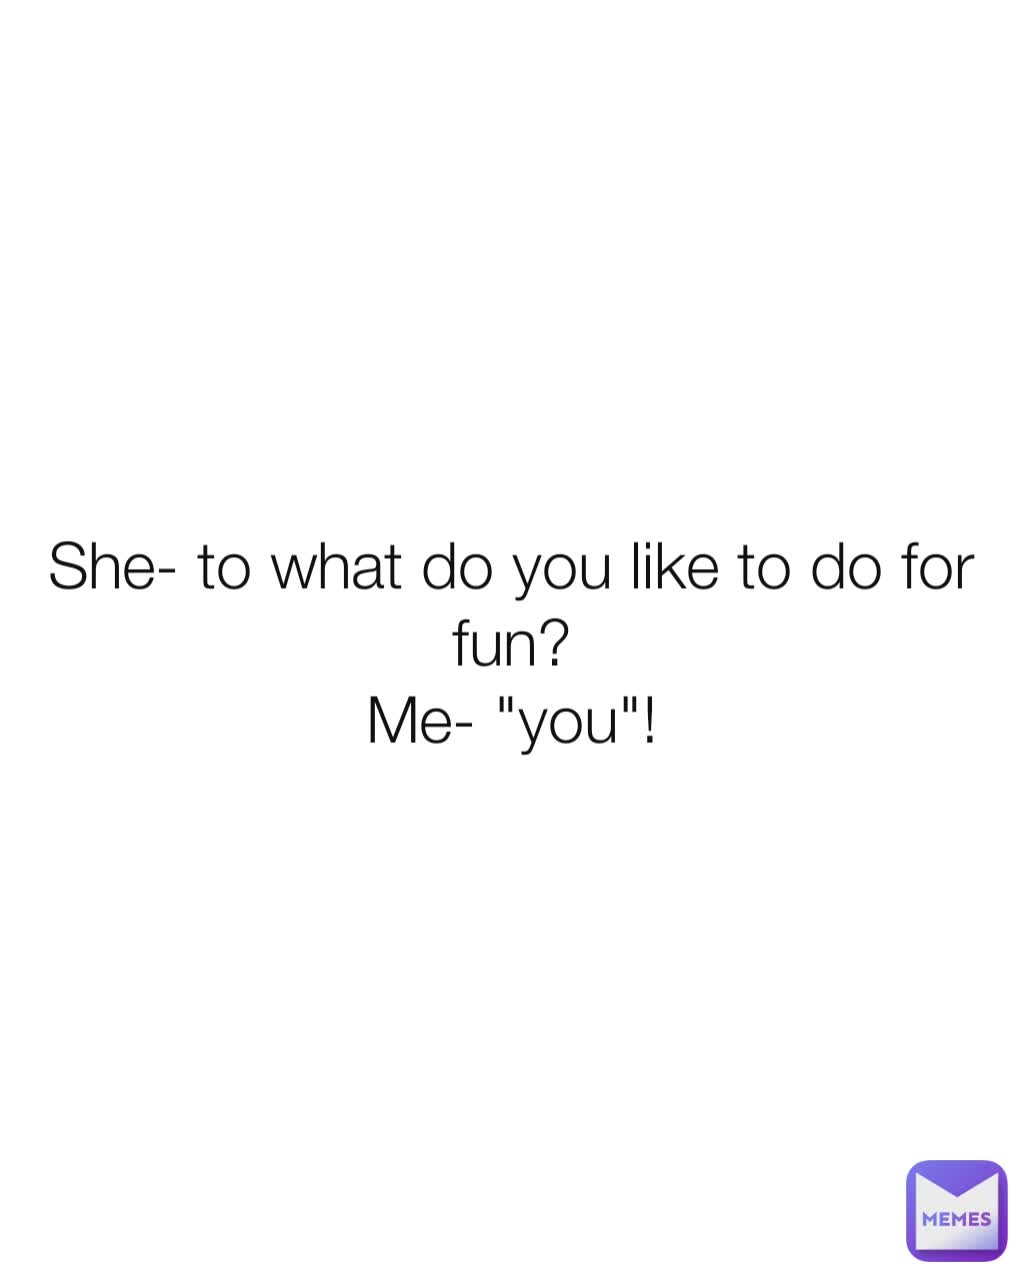 She- to what do you like to do for fun?
Me- "you"!